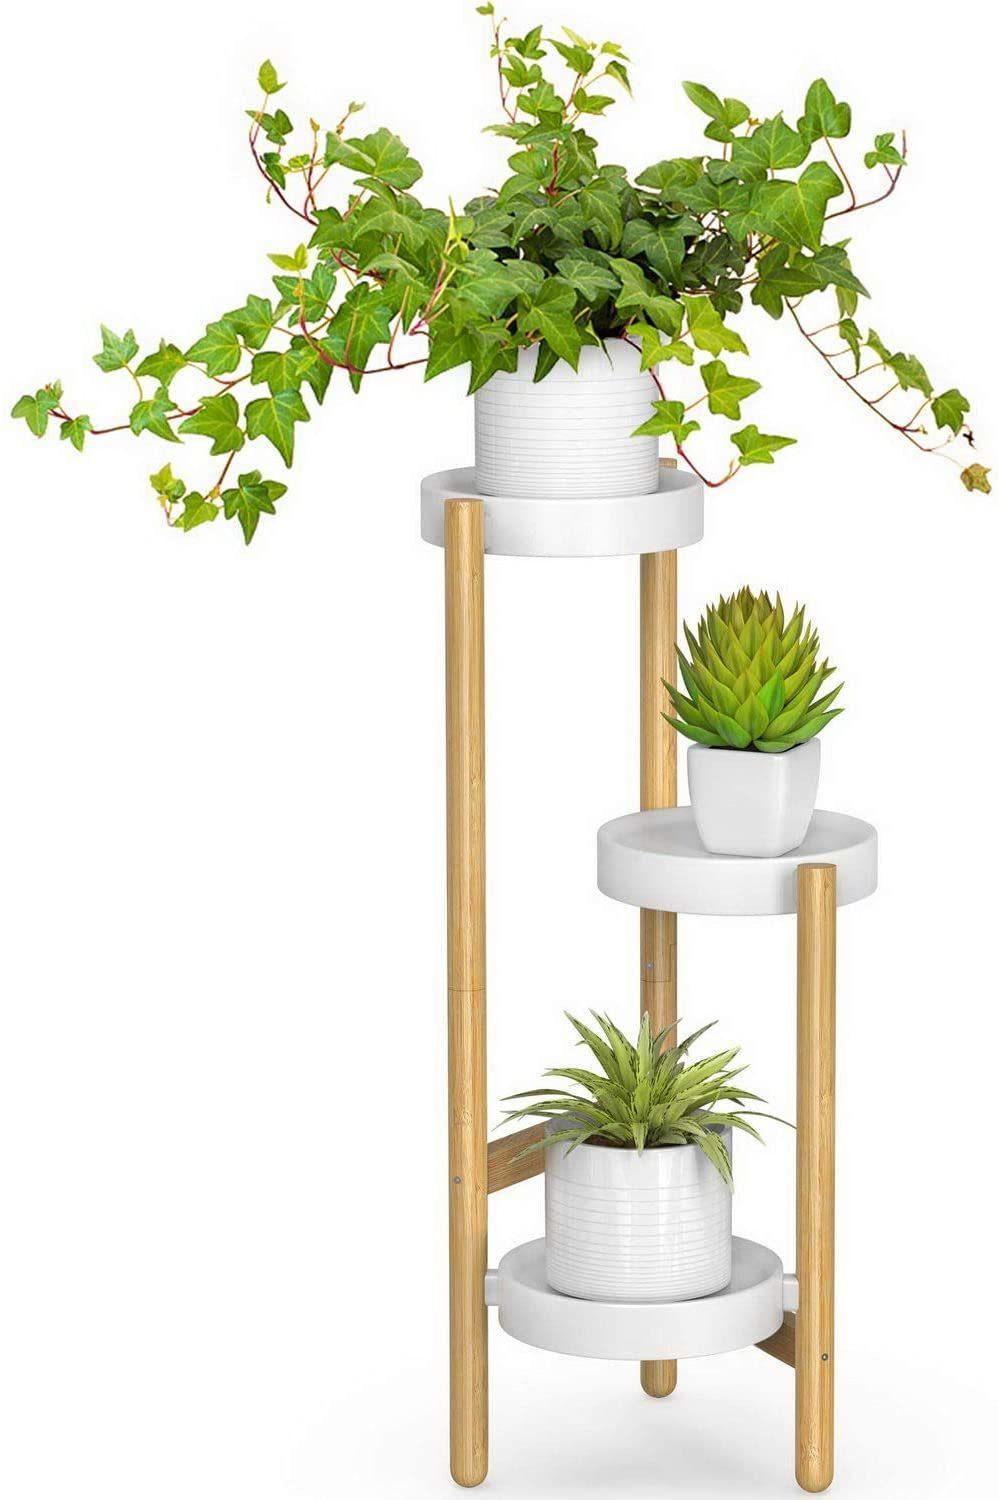 Bamboo Plant Stands Indoor, 3 Tier Tall Corner Plant Stand Holder & Plant Display Rack for Outdoor Garden (3 Tier -1)